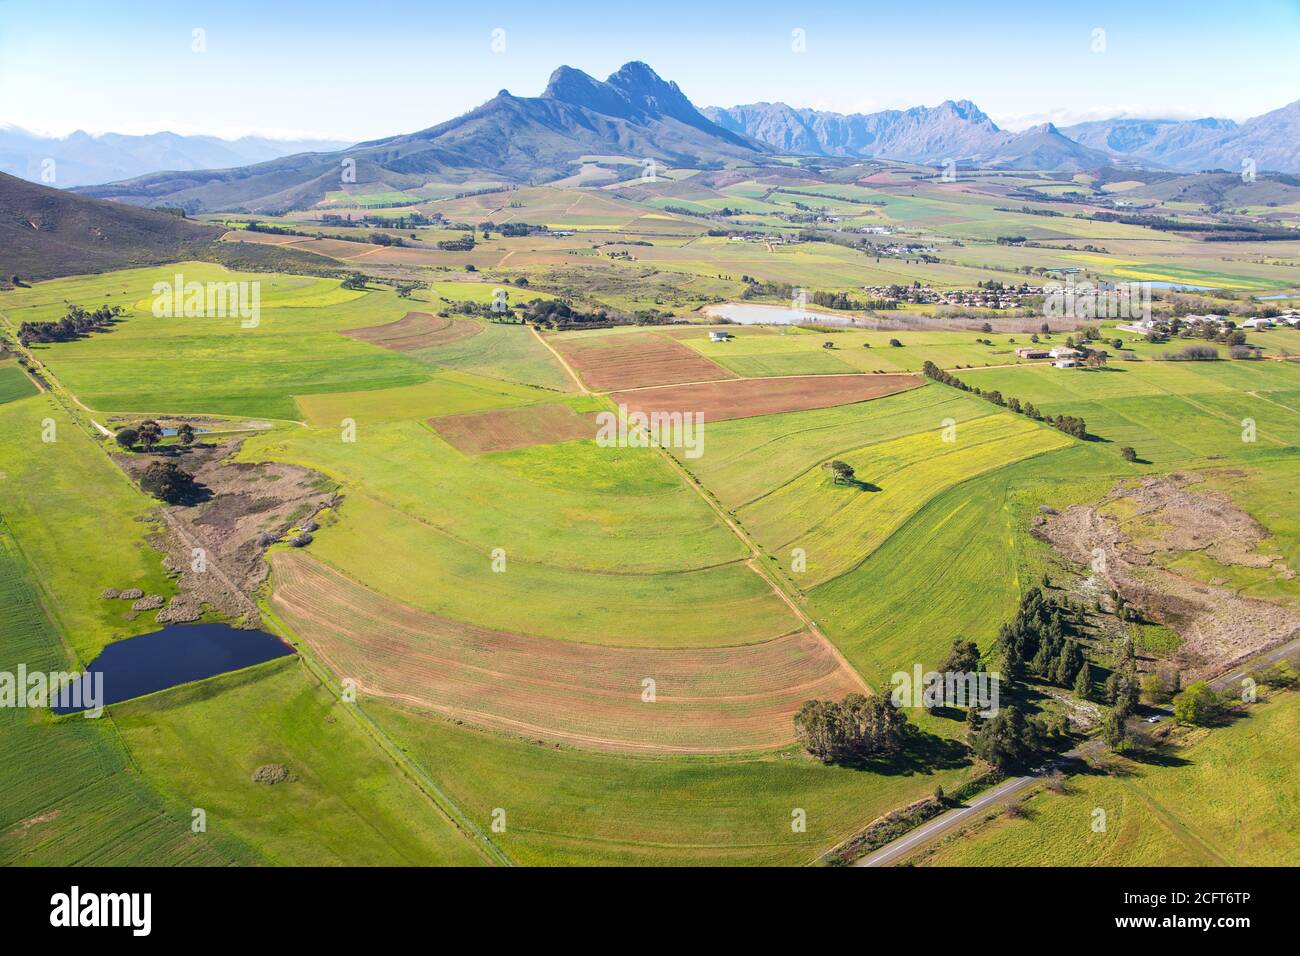 Cape Town, Western Cape / South Africa - 08/26/2020: Aerial photo of agricultural fields and mountains near Stellenbosch Stock Photo